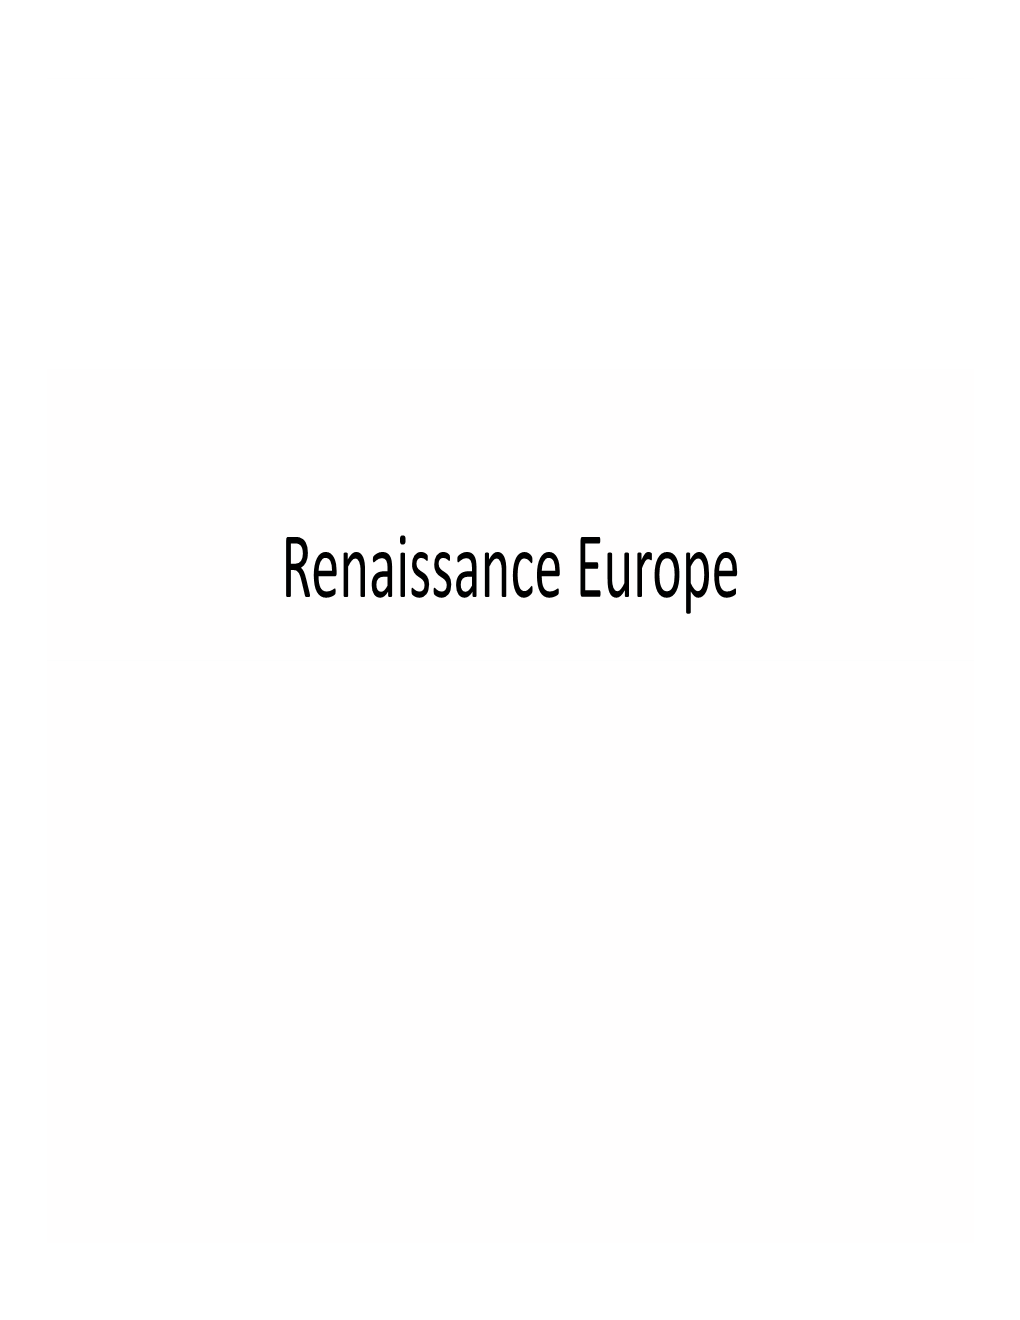 Renaissance Europe the 1500’S and Beyond